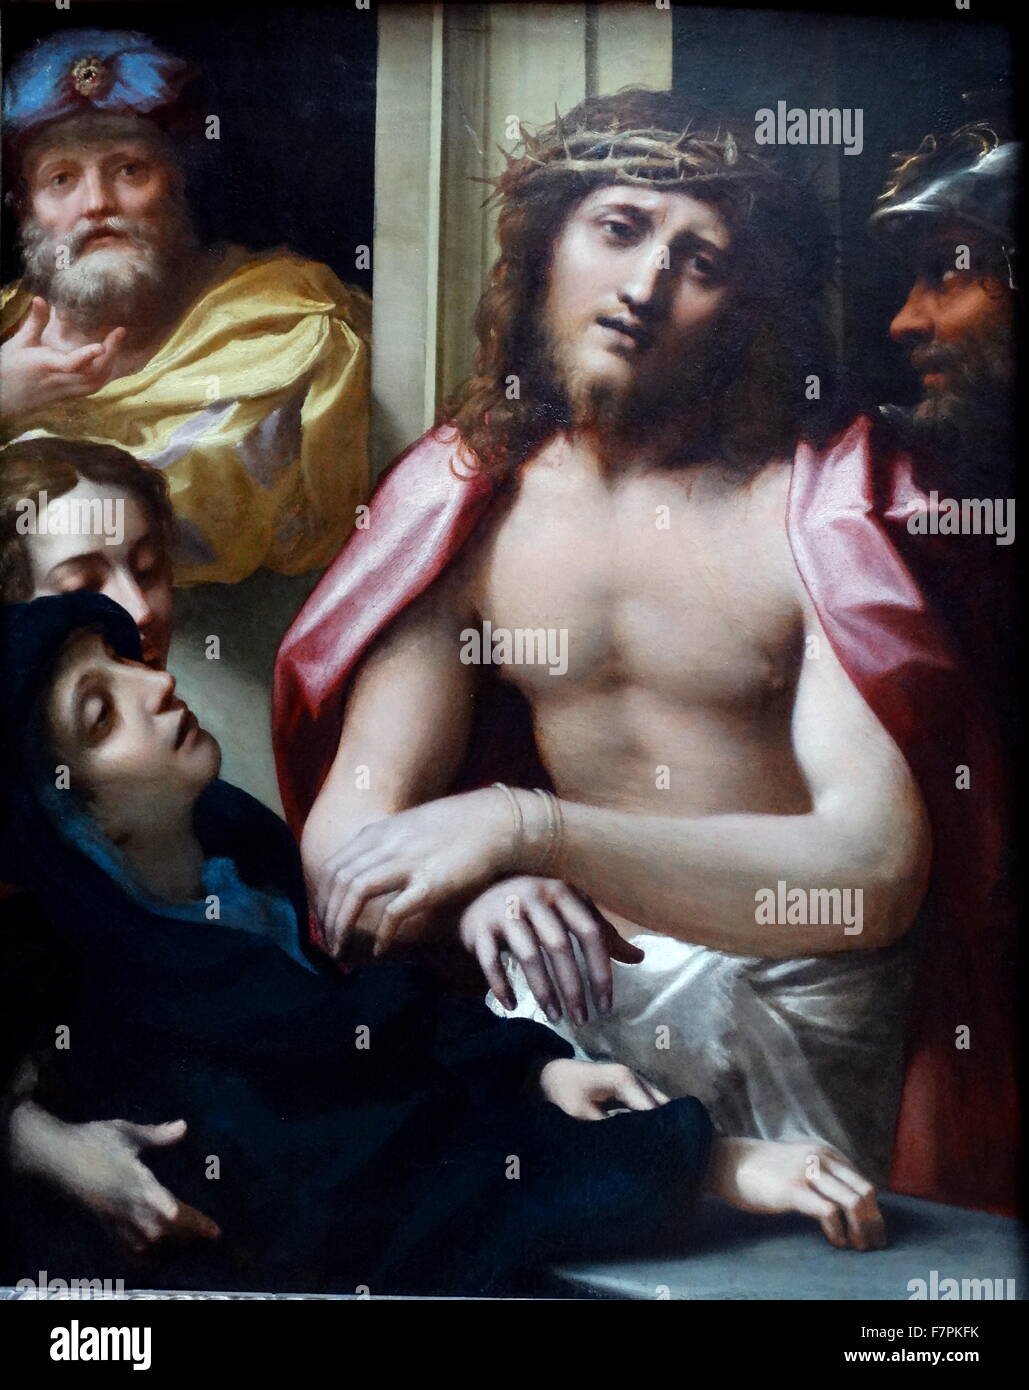 Painting titled 'Christ presented to the People (Ecce Homo)' by Antonio da Correggio (1489-1534) painter of the Parma school of the Italian Renaissance. Dated 16th Century Stock Photo